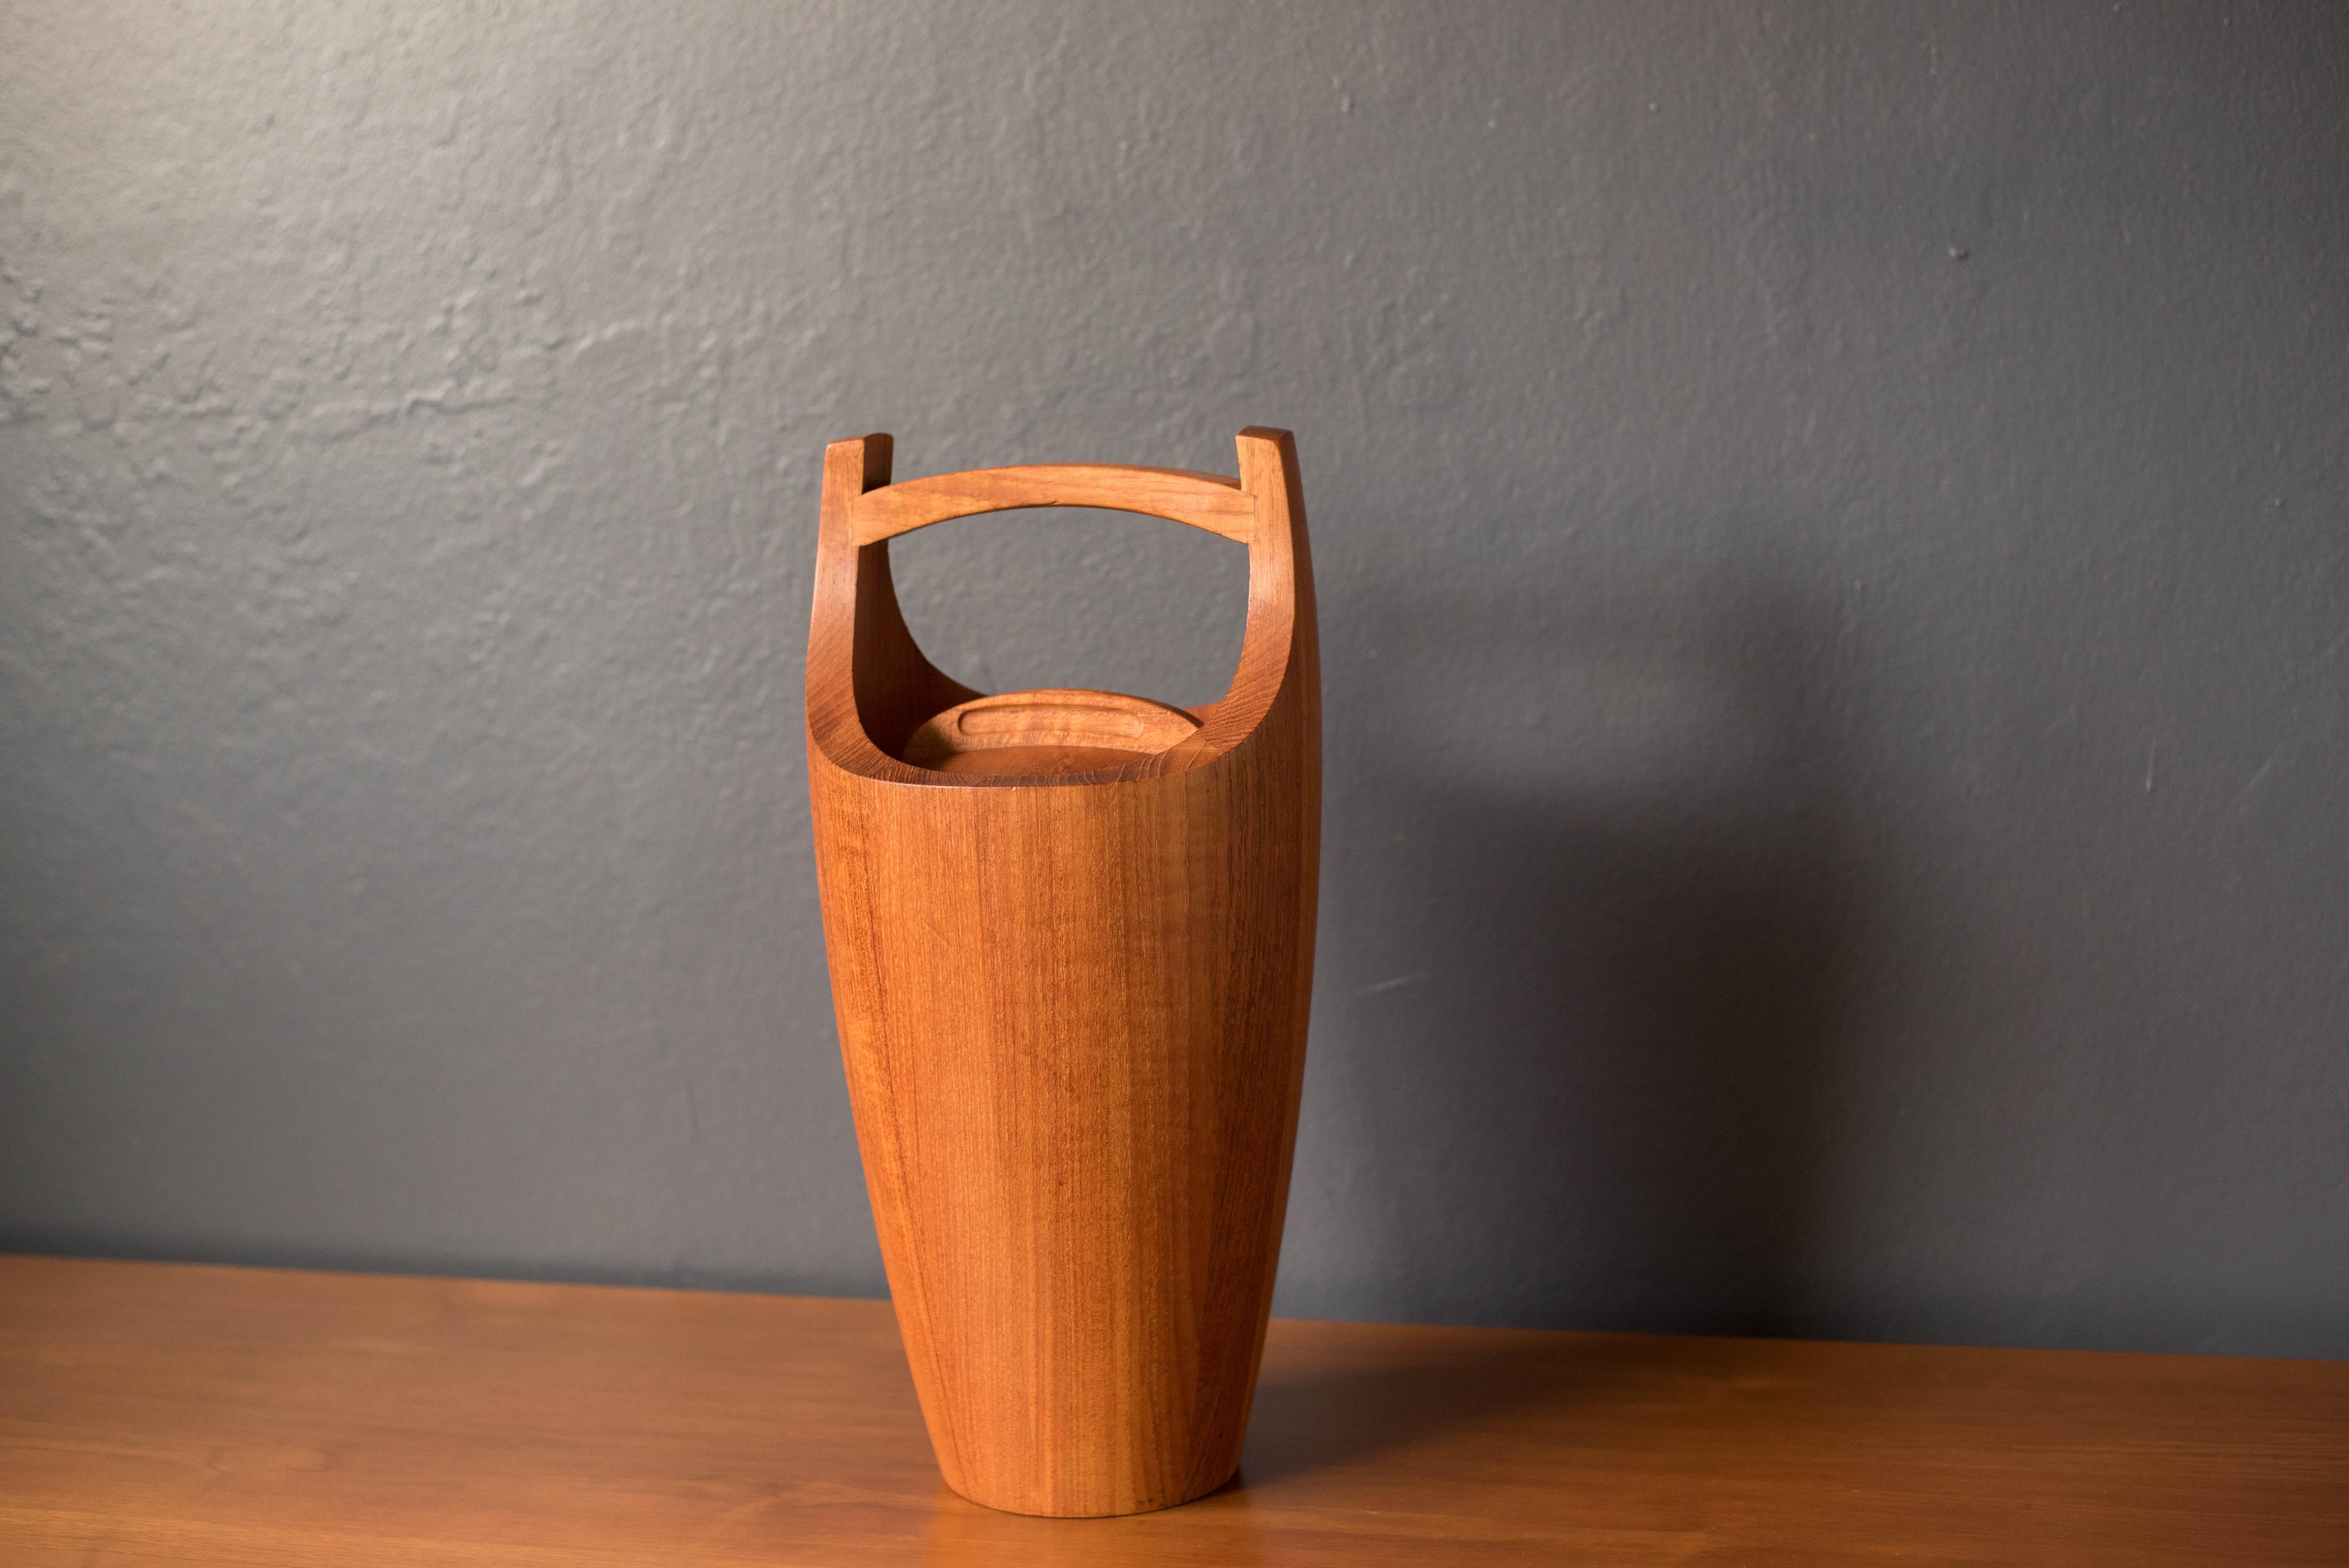 Mid Century Modern Dansk ice bucket wine cooler designed by Jens Harald Quistgaard, circa 1960's. This collectible piece is made of solid teak and features the original orange interior liner and sculptural carrying handle. The perfect decorative